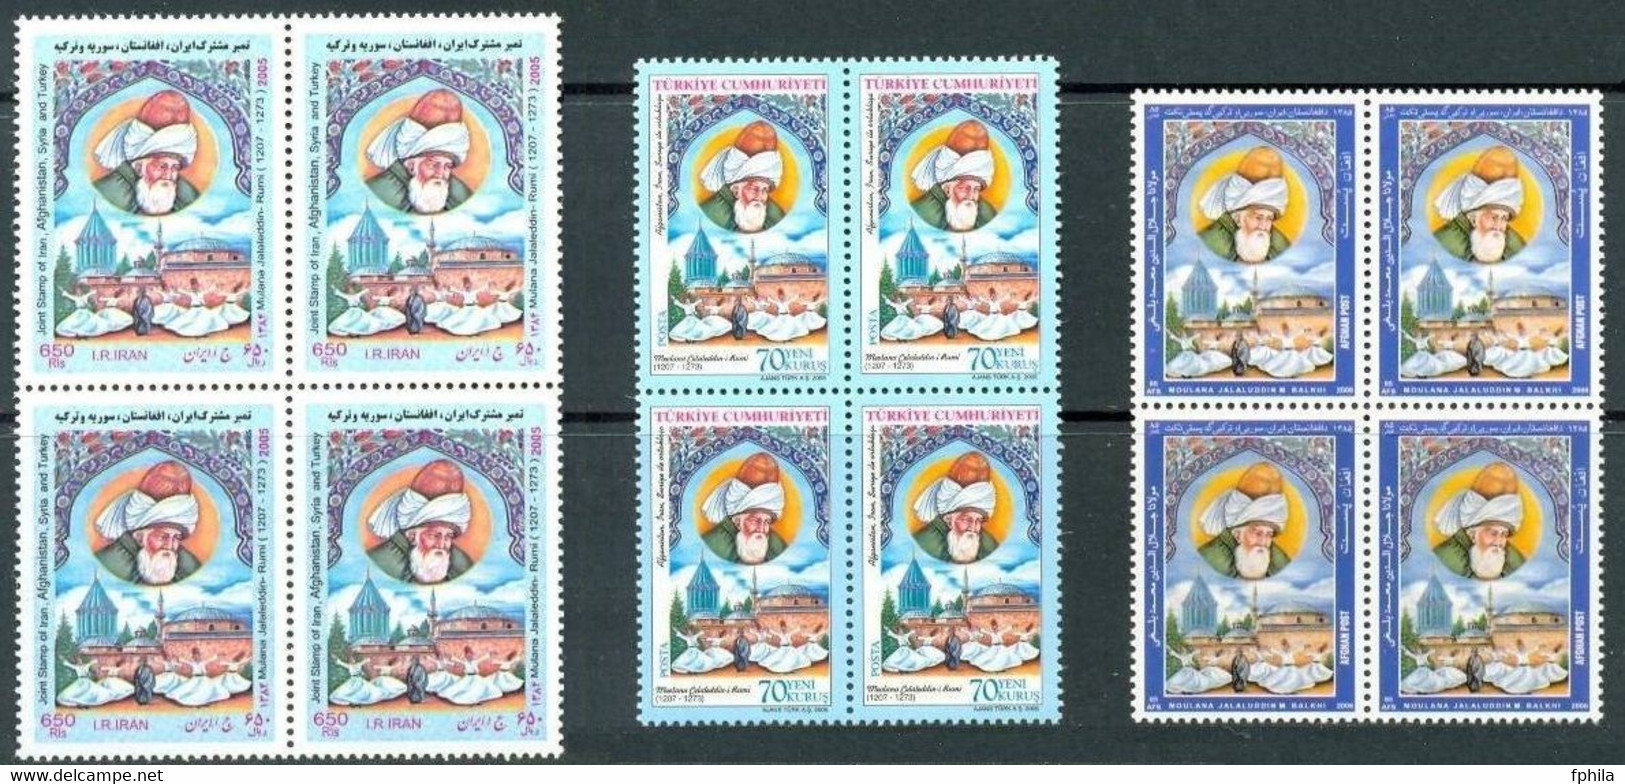 2005 TURKEY CULTURAL ASSETS MEVLANA JOINT ISSUE WITH IRAN AND AFGHANISTAN BLOCK OF 4 MNH ** - Emissions Communes